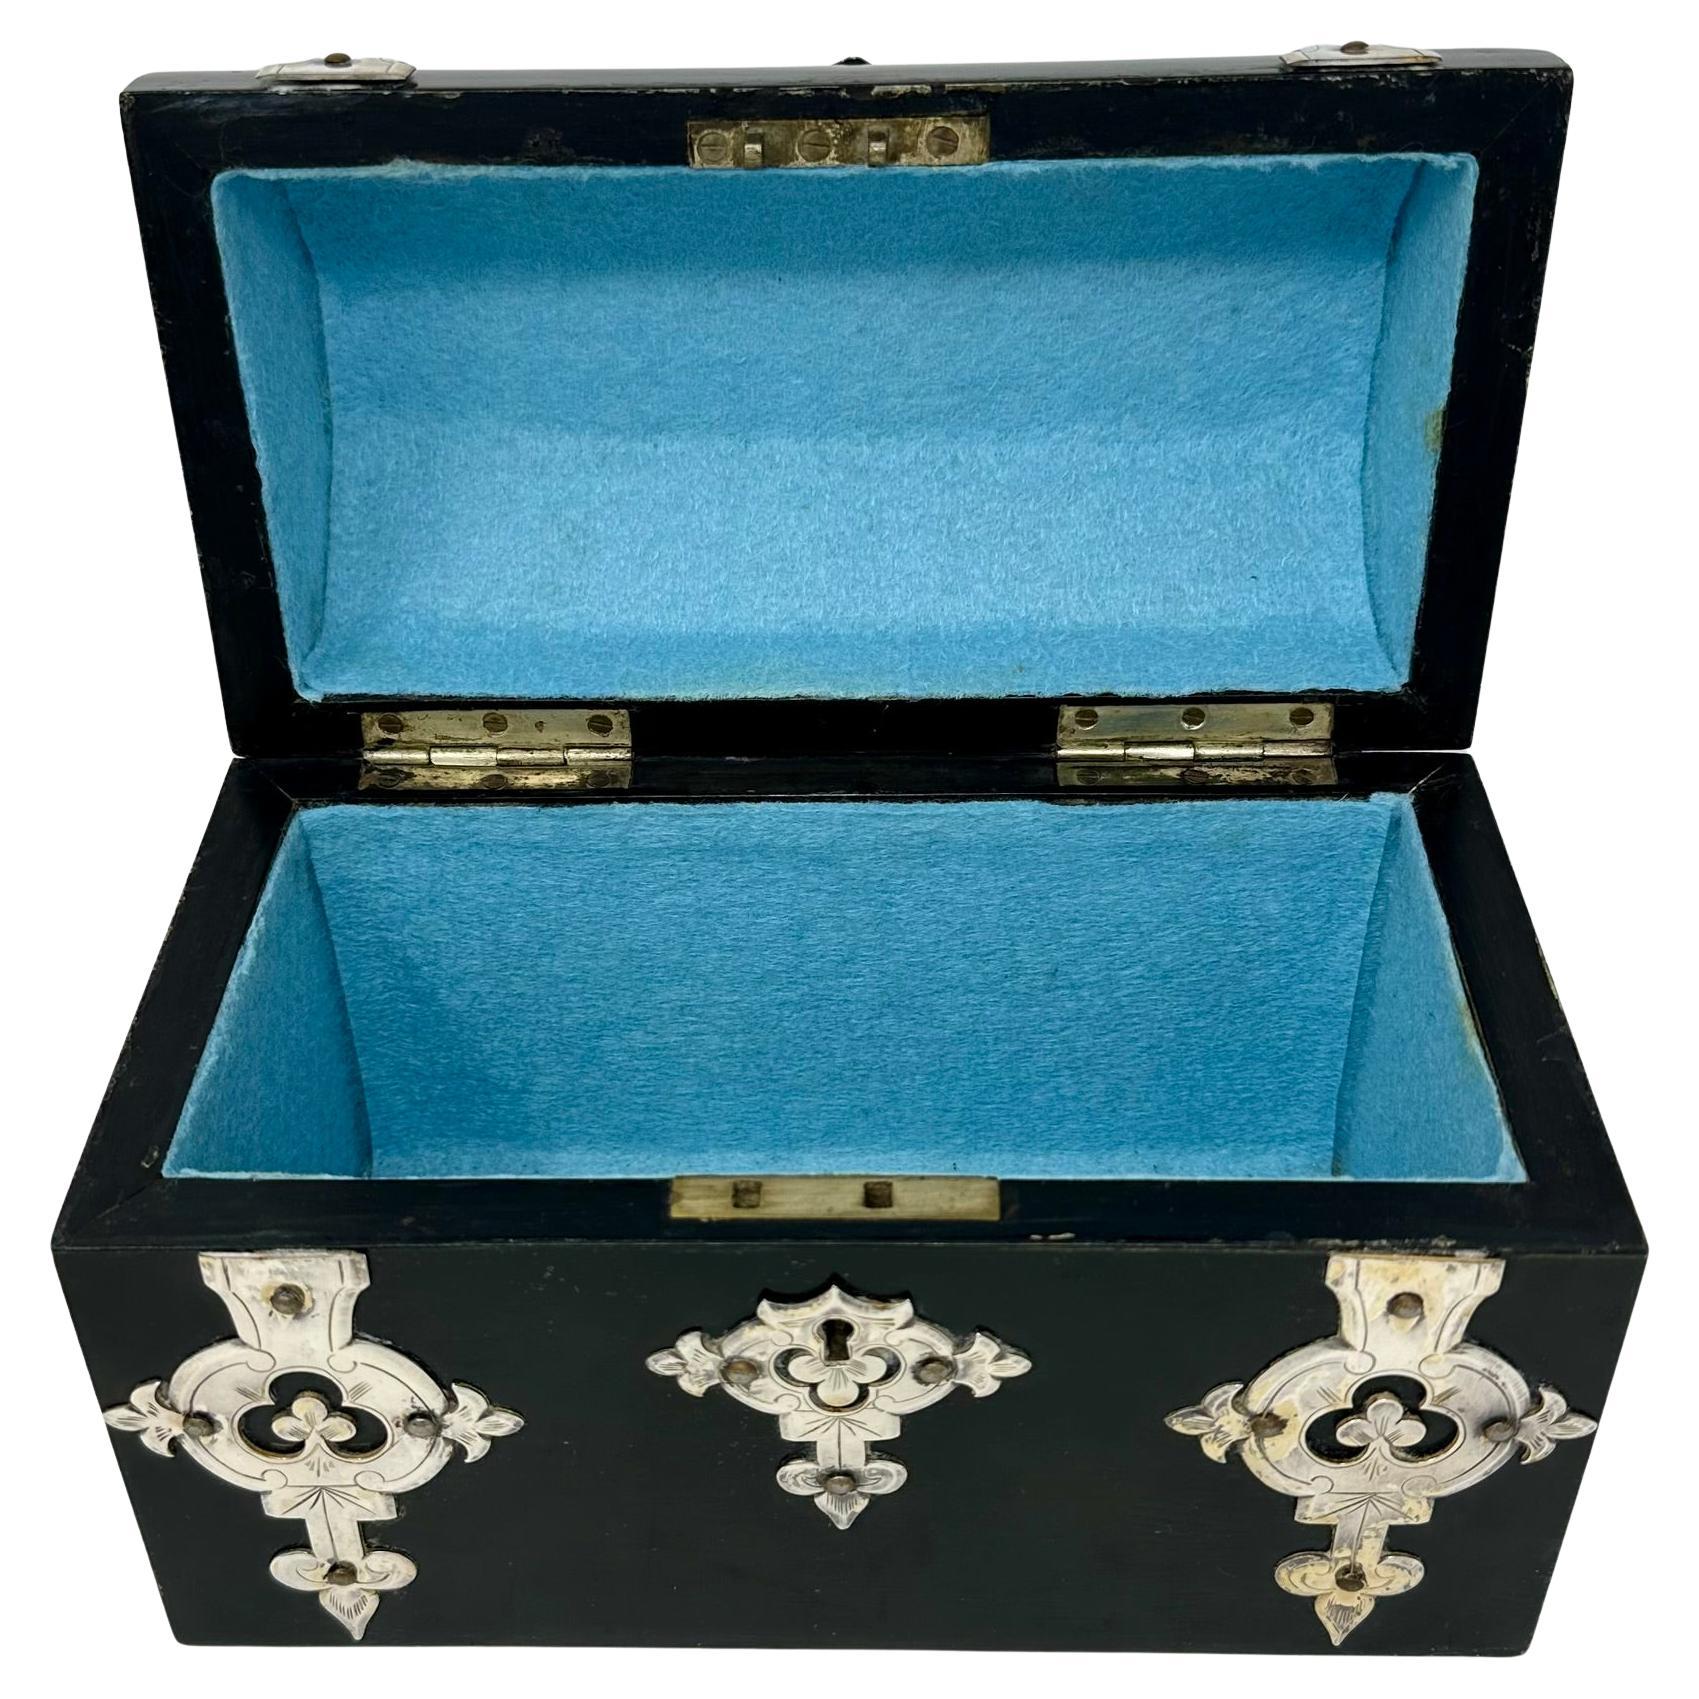 19th Century Antique English Wedgwood & Sheffield Silver Mounted Jewel Box, Circa 1880. For Sale